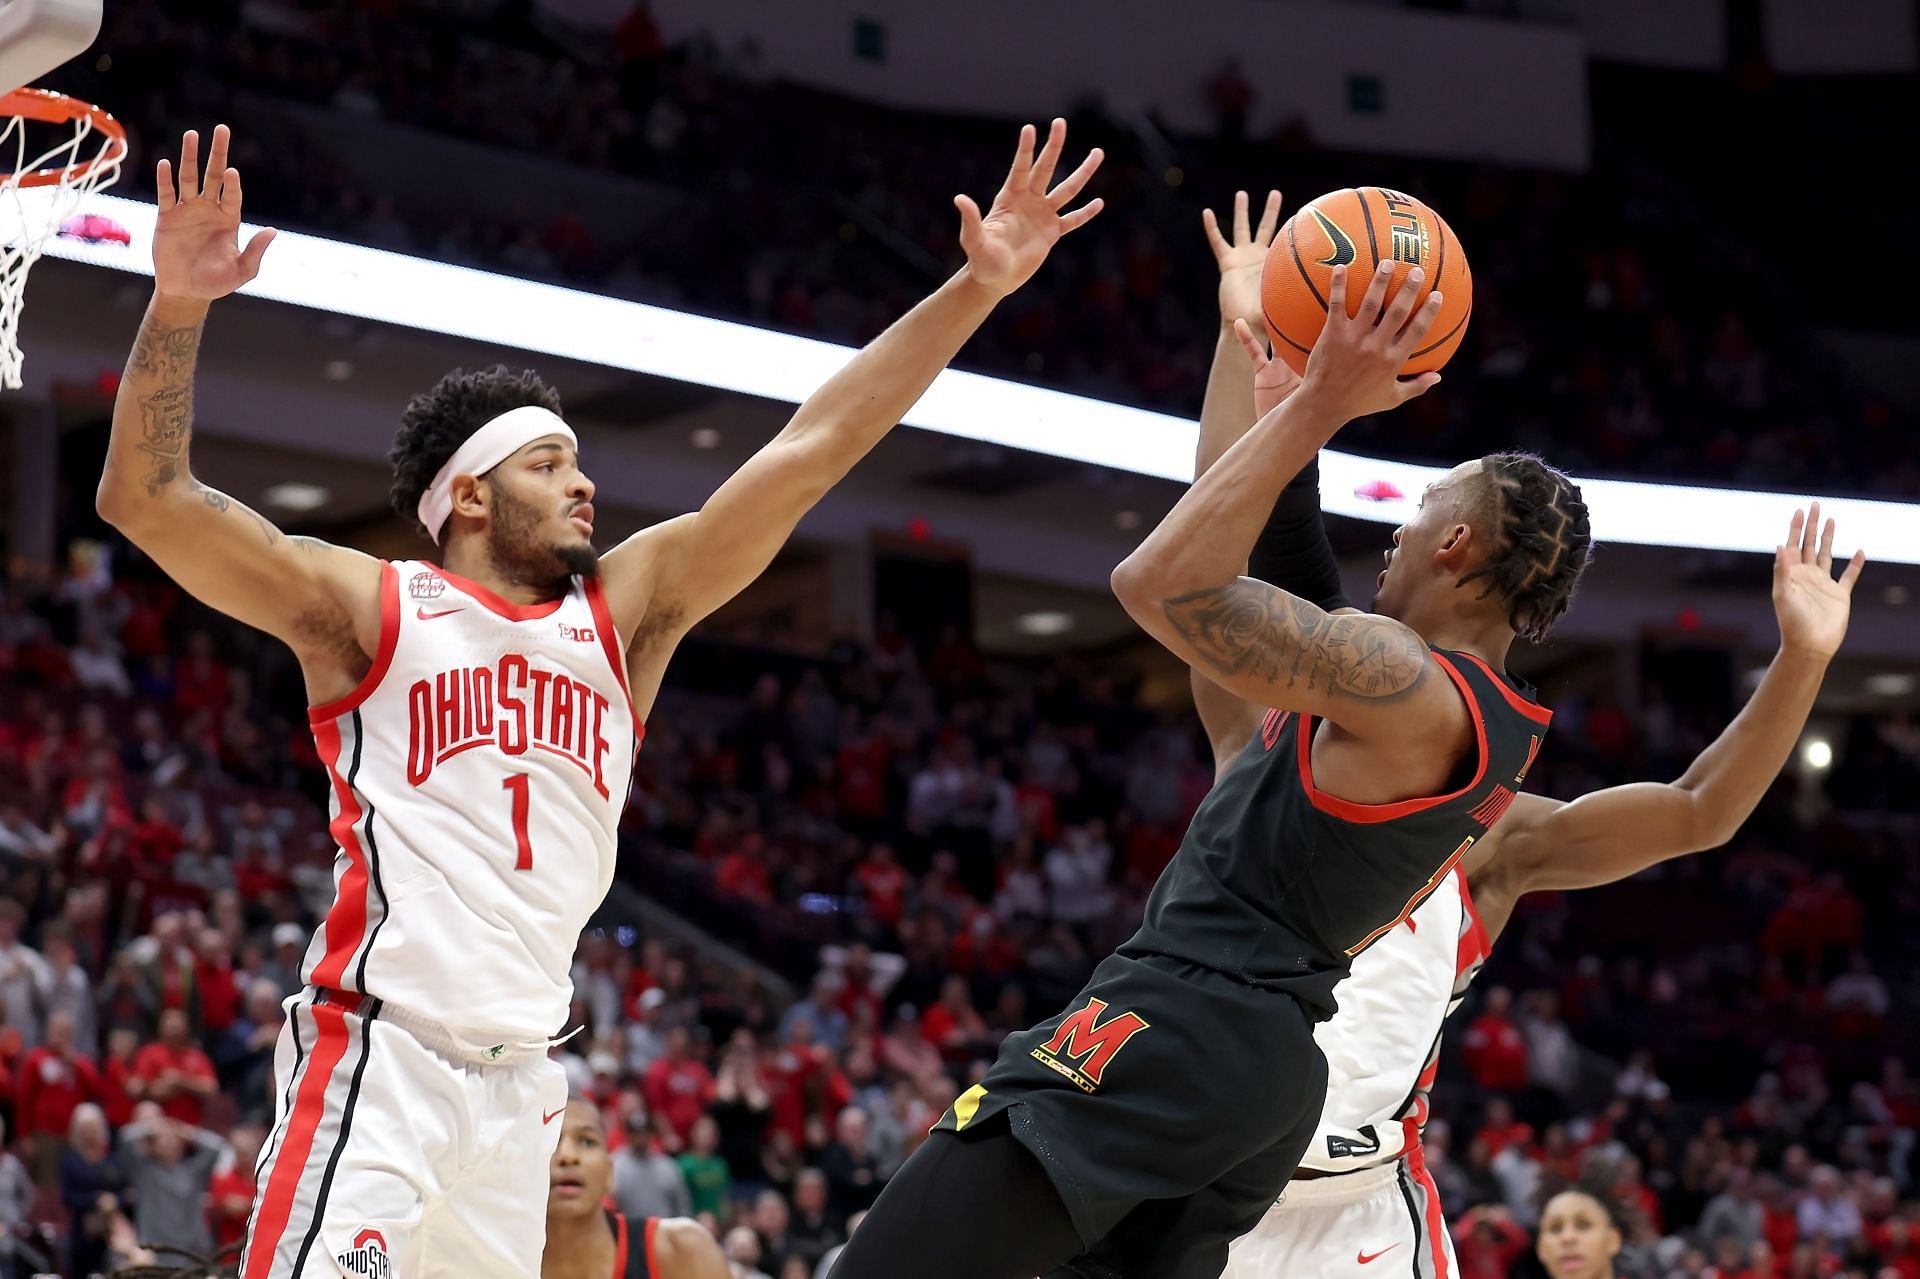 Ohio State&#039;s Roddy Gayle will be an attractive transfer possibility after Chris Holtmann&#039;s firing.